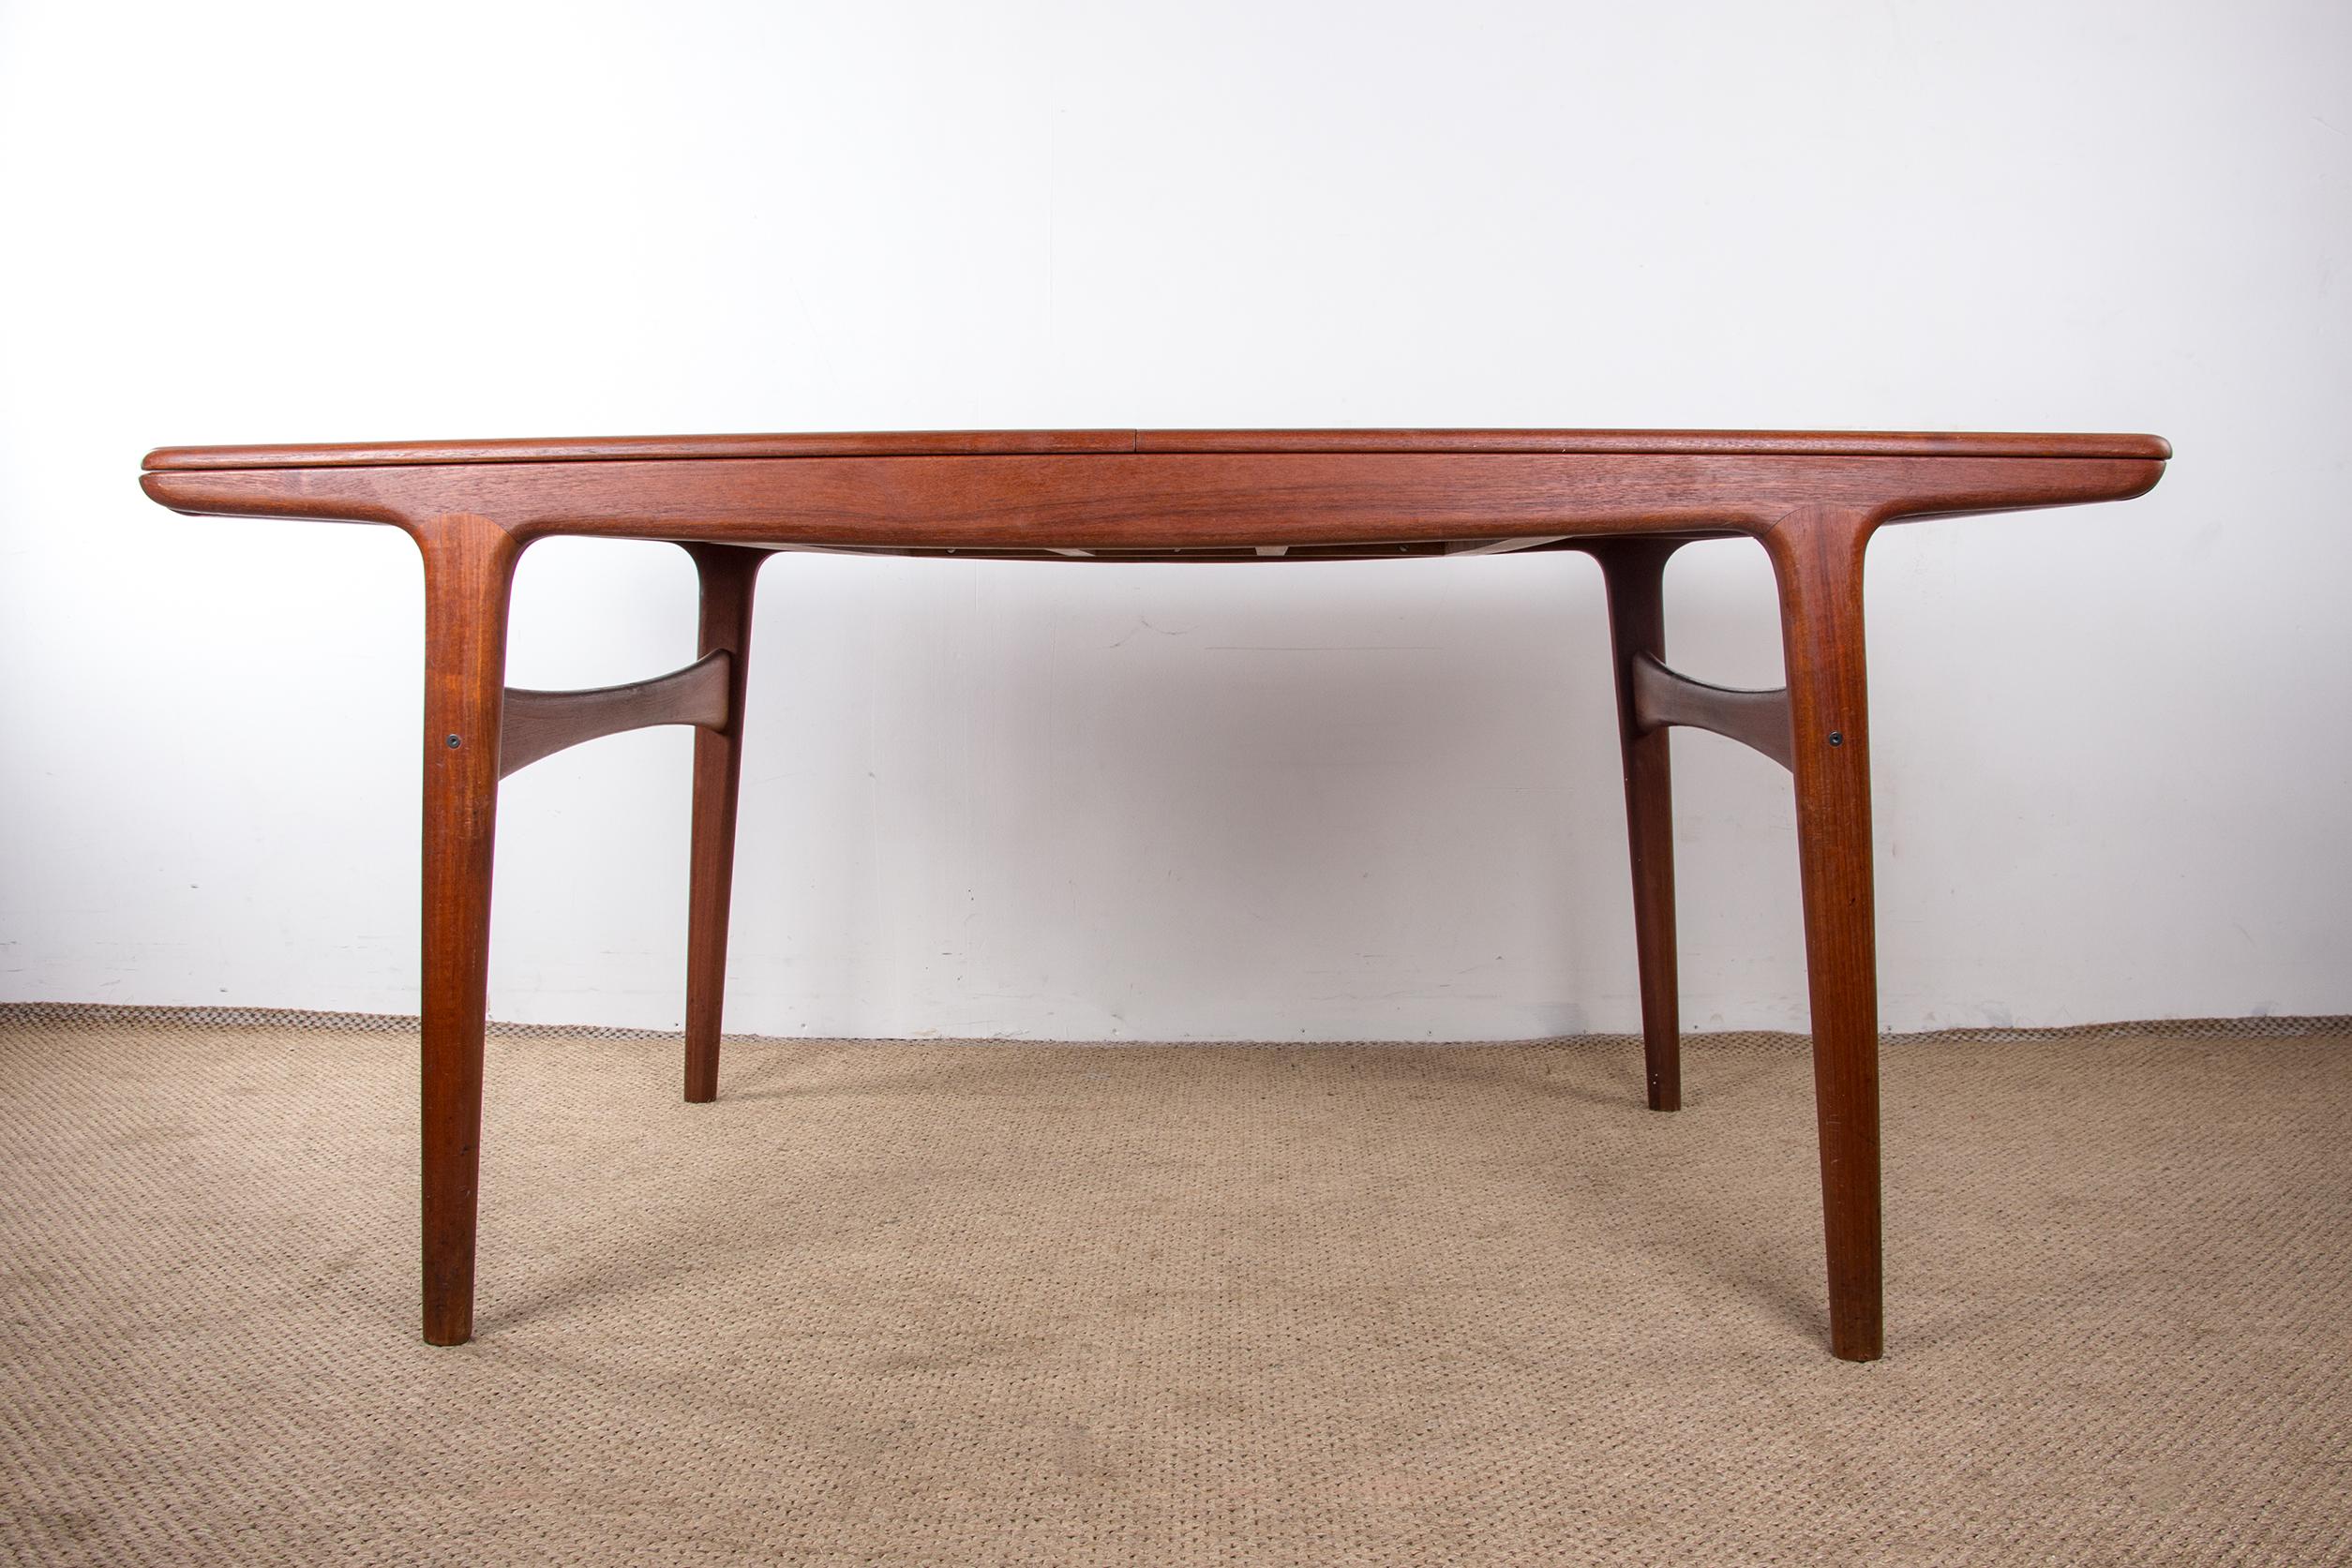 Large Scandinavian dining room table with two extension leaves that fit under the table, it can accommodate 10 people. 
Its base, oriented slightly outwards, and its airy top give it a lot of style. Very beautiful workmanship. This piece of